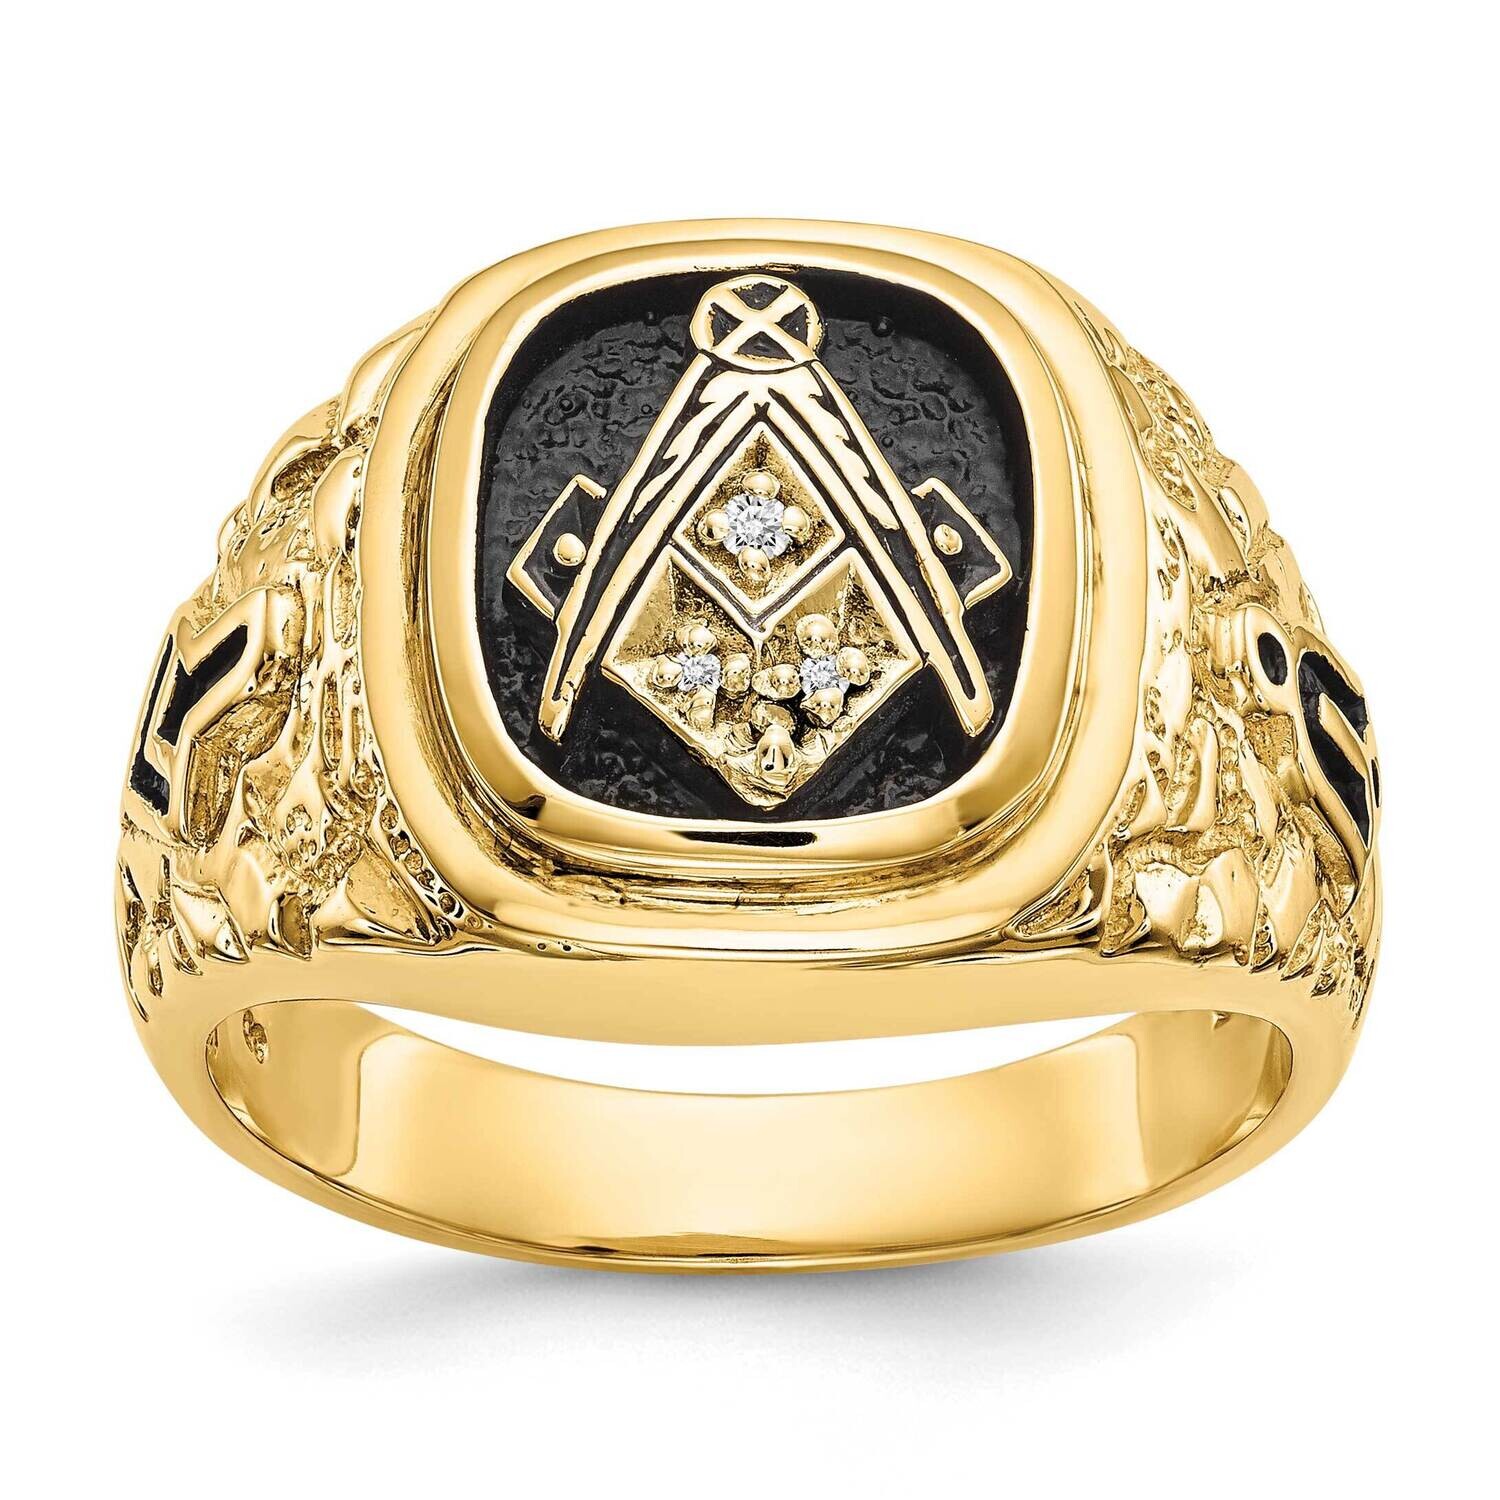 Antiqued Nugget Texture Aa Quality Diamond Masonic Ring 10k Polished Gold 10Y4035AA